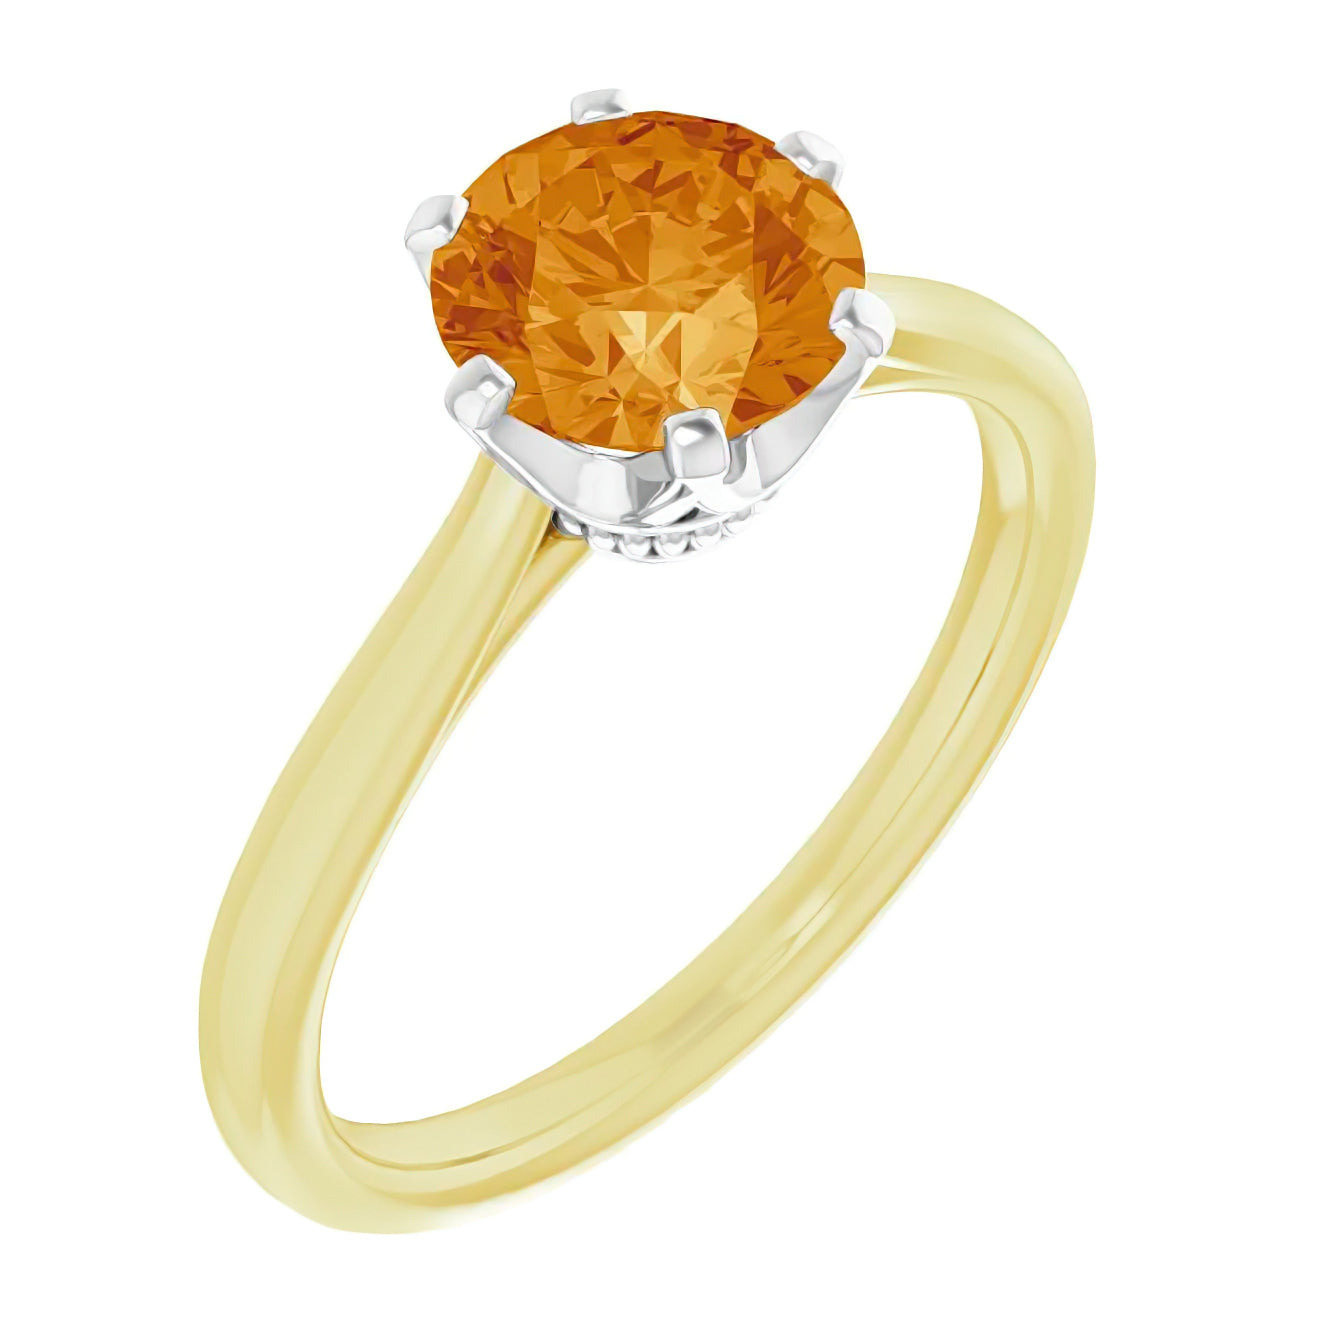 R102 1950s Vintage Solitaire Citrine Engagement Ring in Yellow and White Gold Two Tone